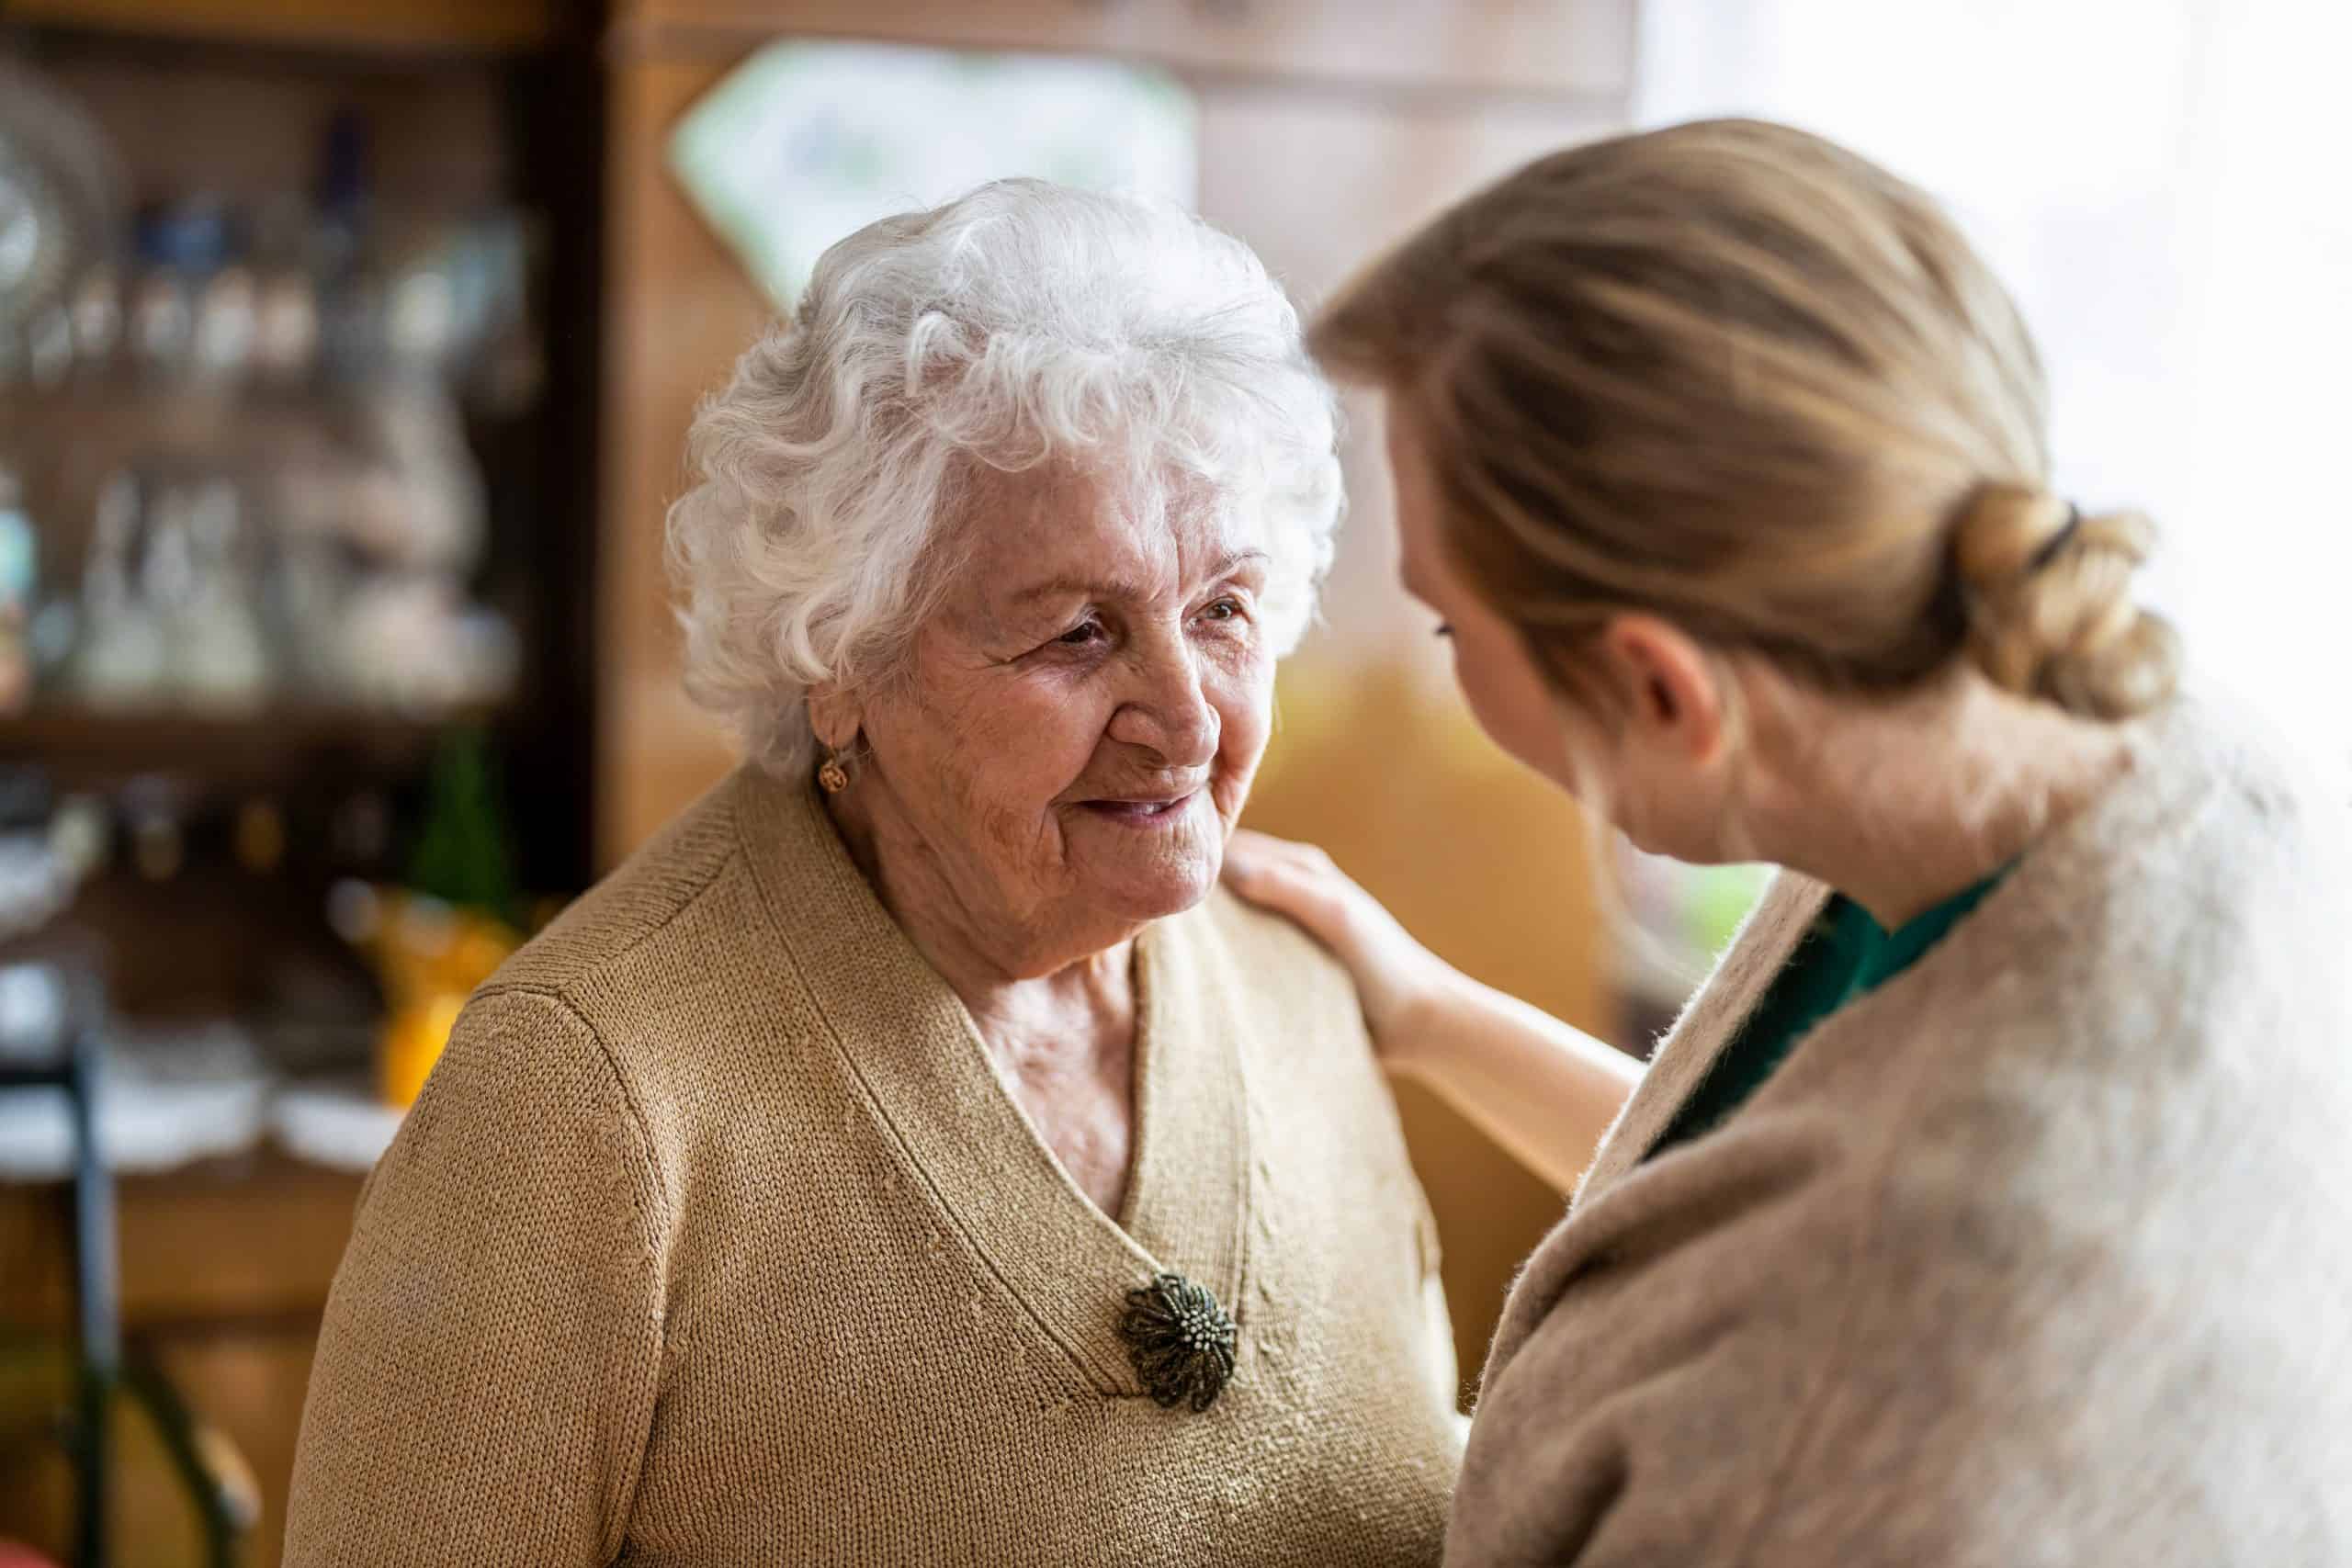 Talking to a loved one about them moving from assisted living to a nursing home